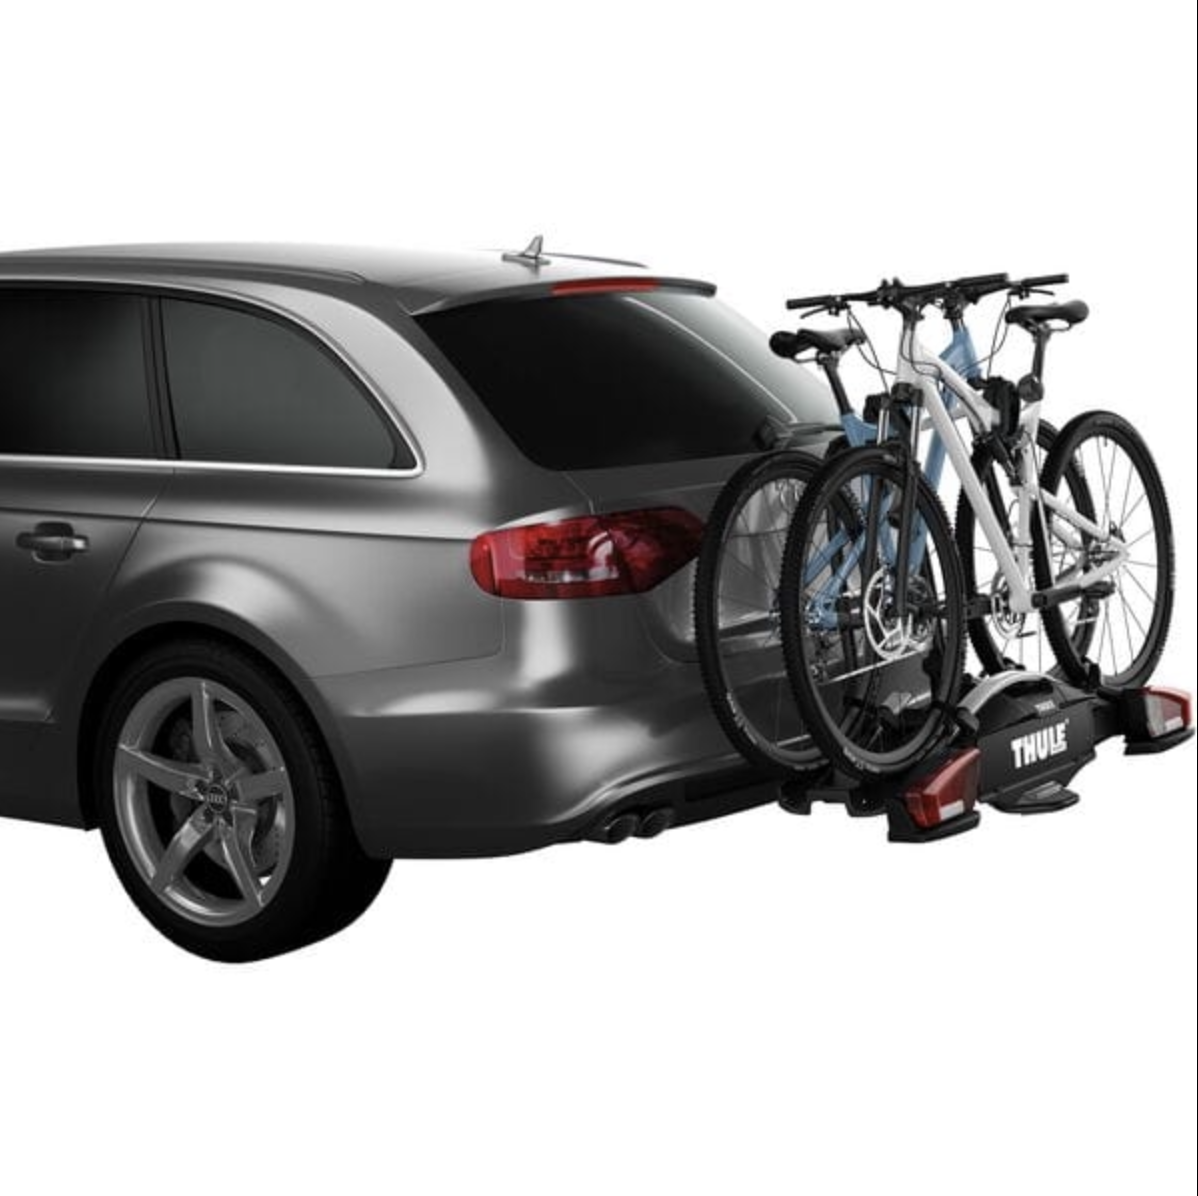 THULE VELOCOMPACT TOWBALL BIKE CARRIER